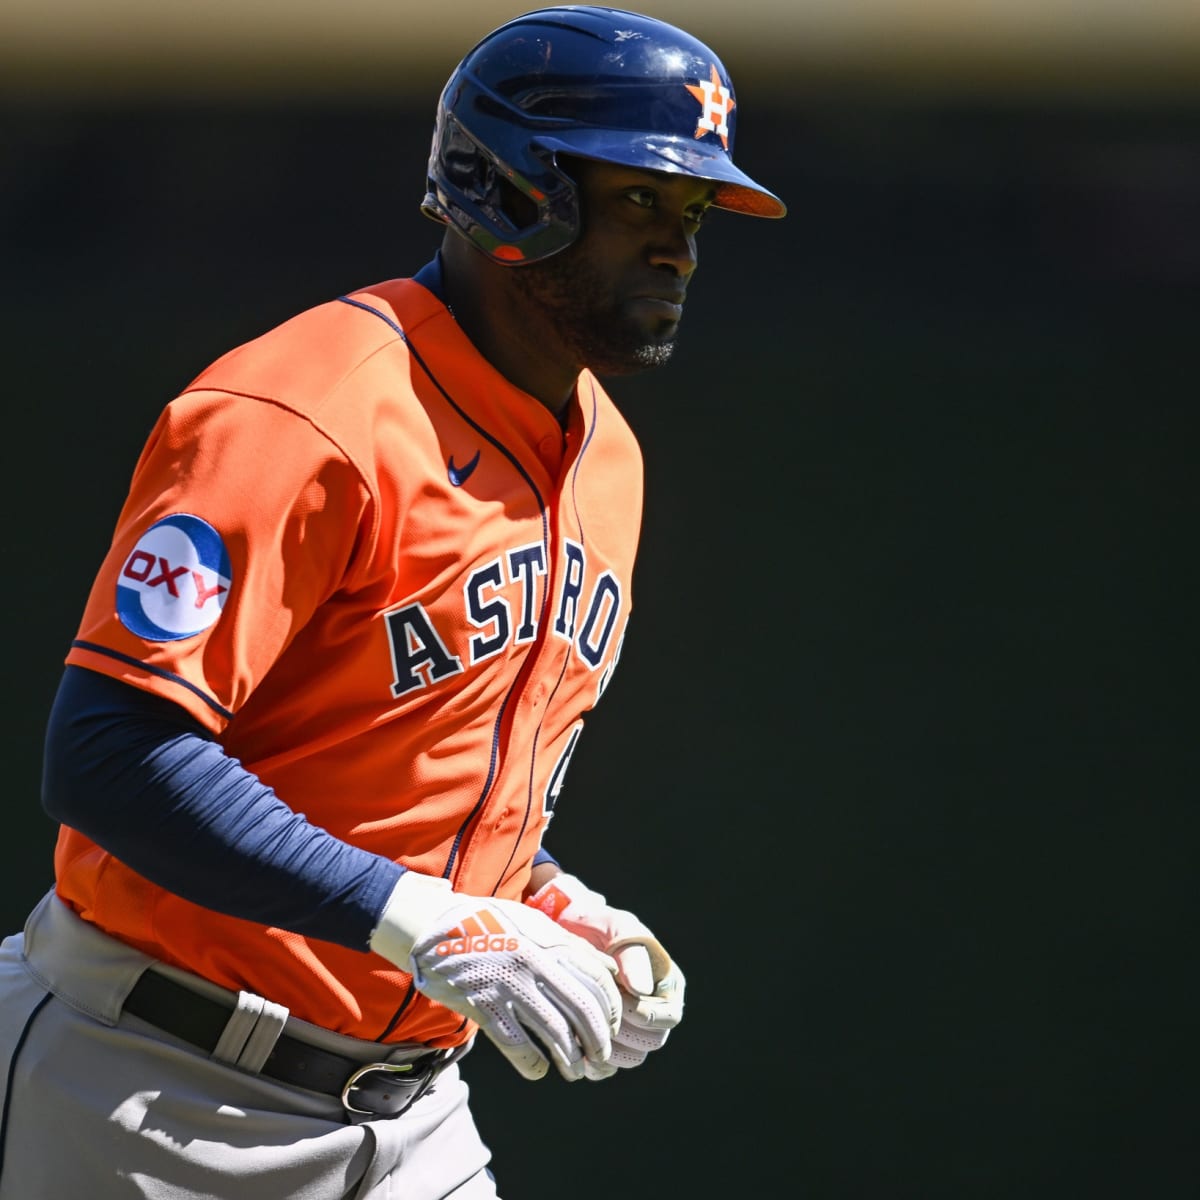 WATCH: MLB Network Host Talks About How Good Houston Astros